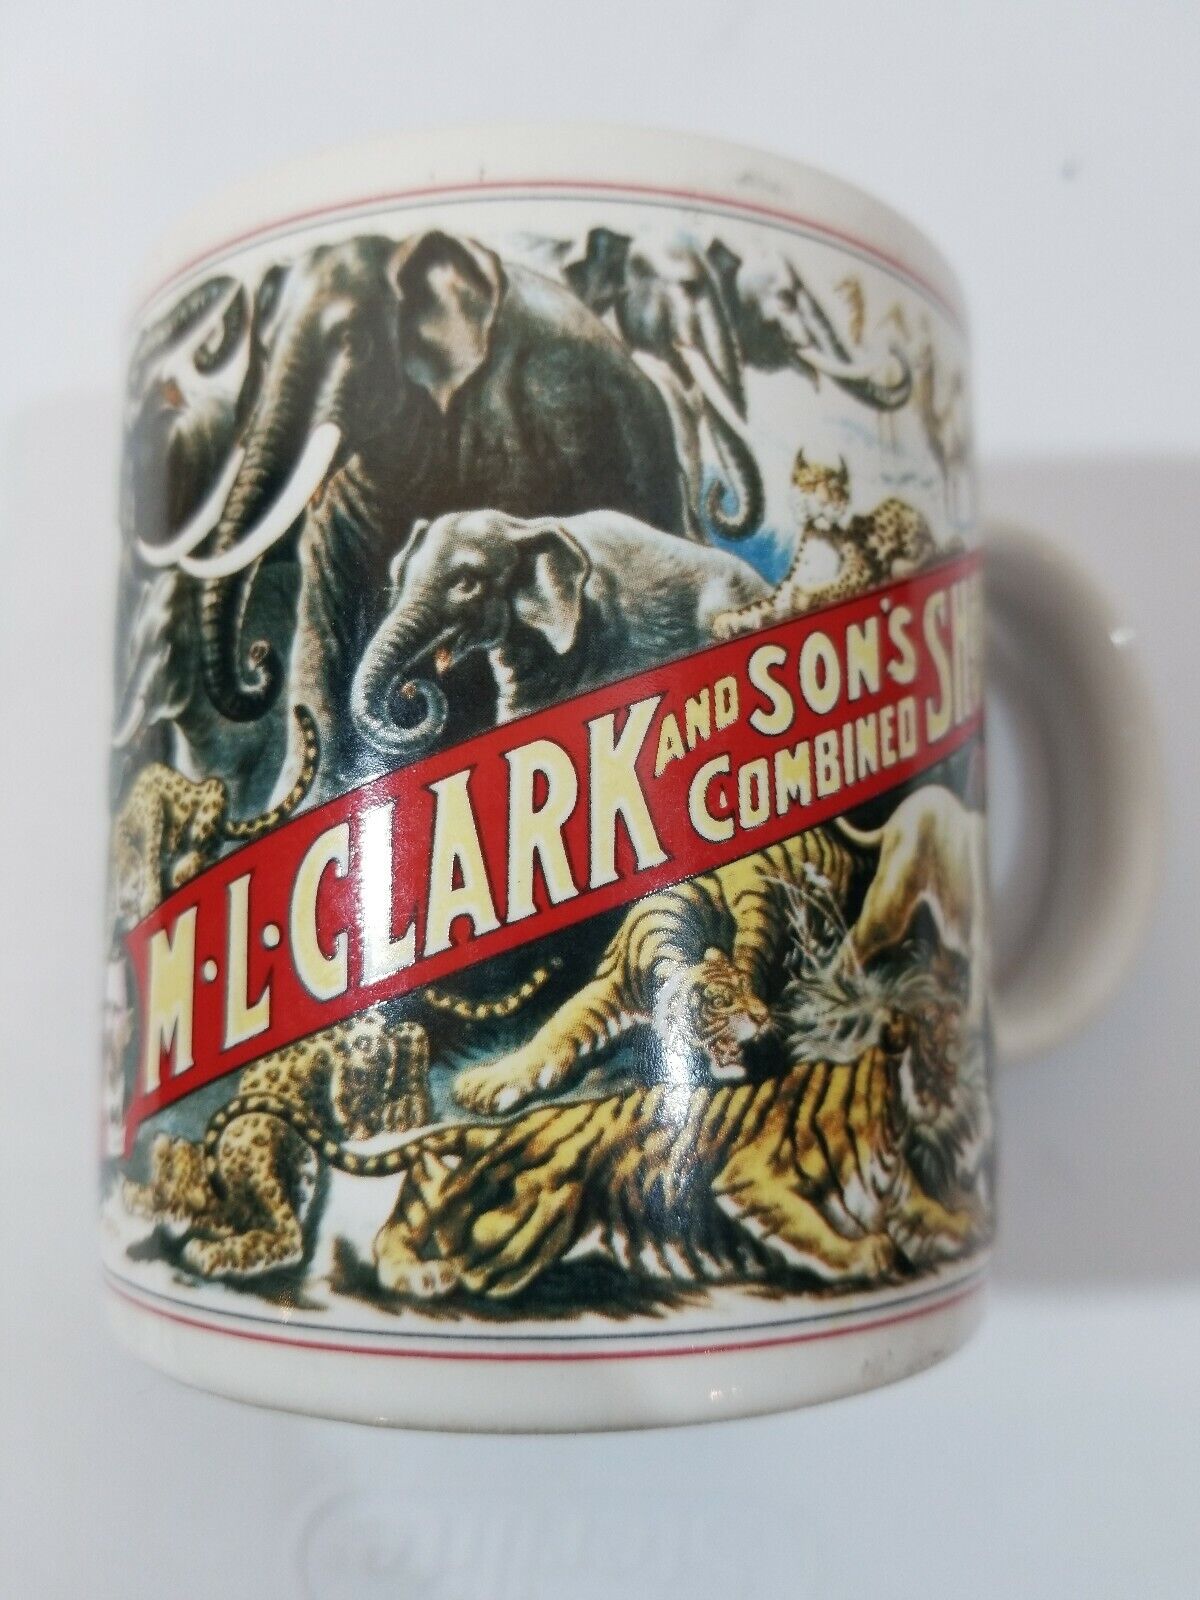  M.L. Clark and Son\'s Circus Combined Shows Stoneware Coffee Mug Cup Elephants